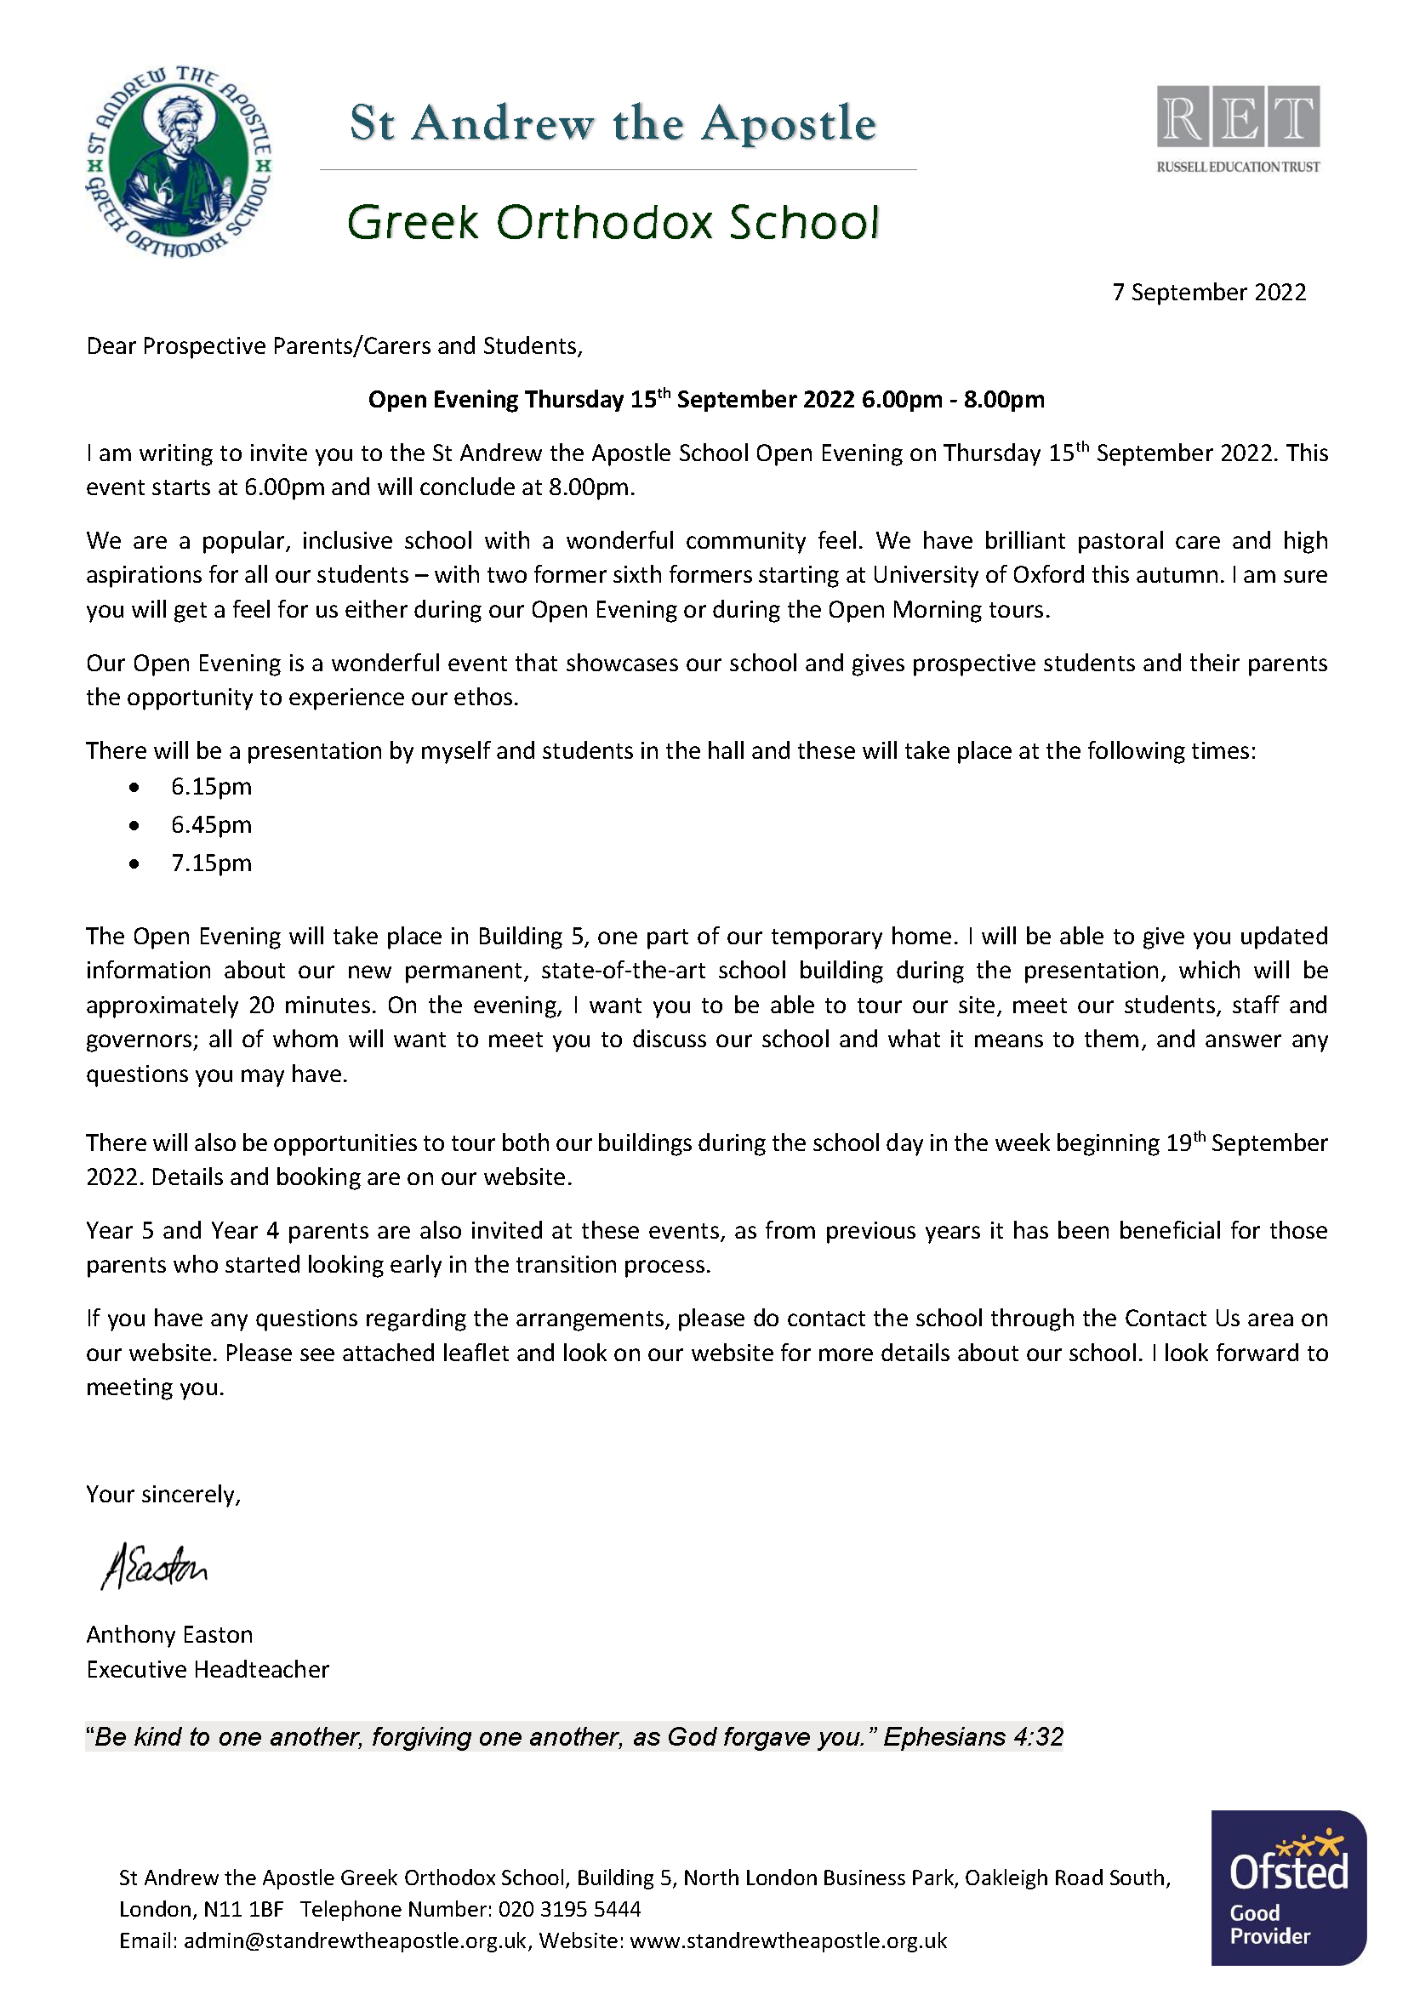 Open evening letter from St Andrew the Apostle - 15 September between 6pm-8pm